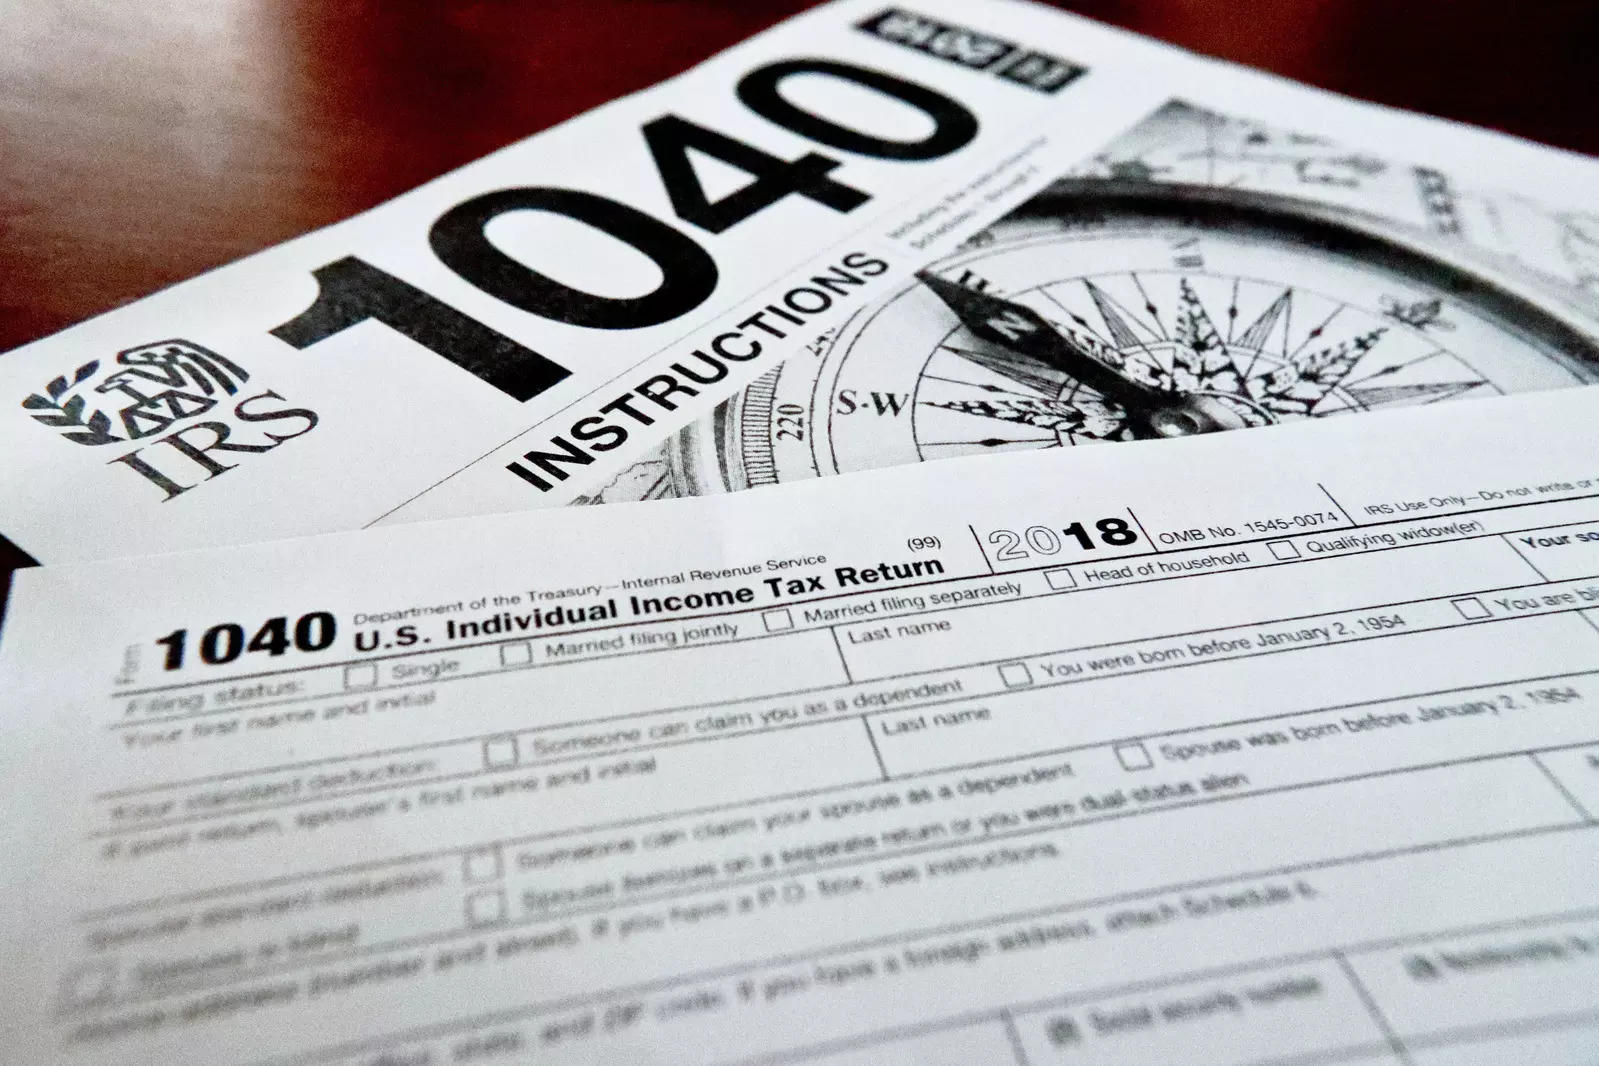 Expanded IRS free-file system one step closer in US Dems' bill